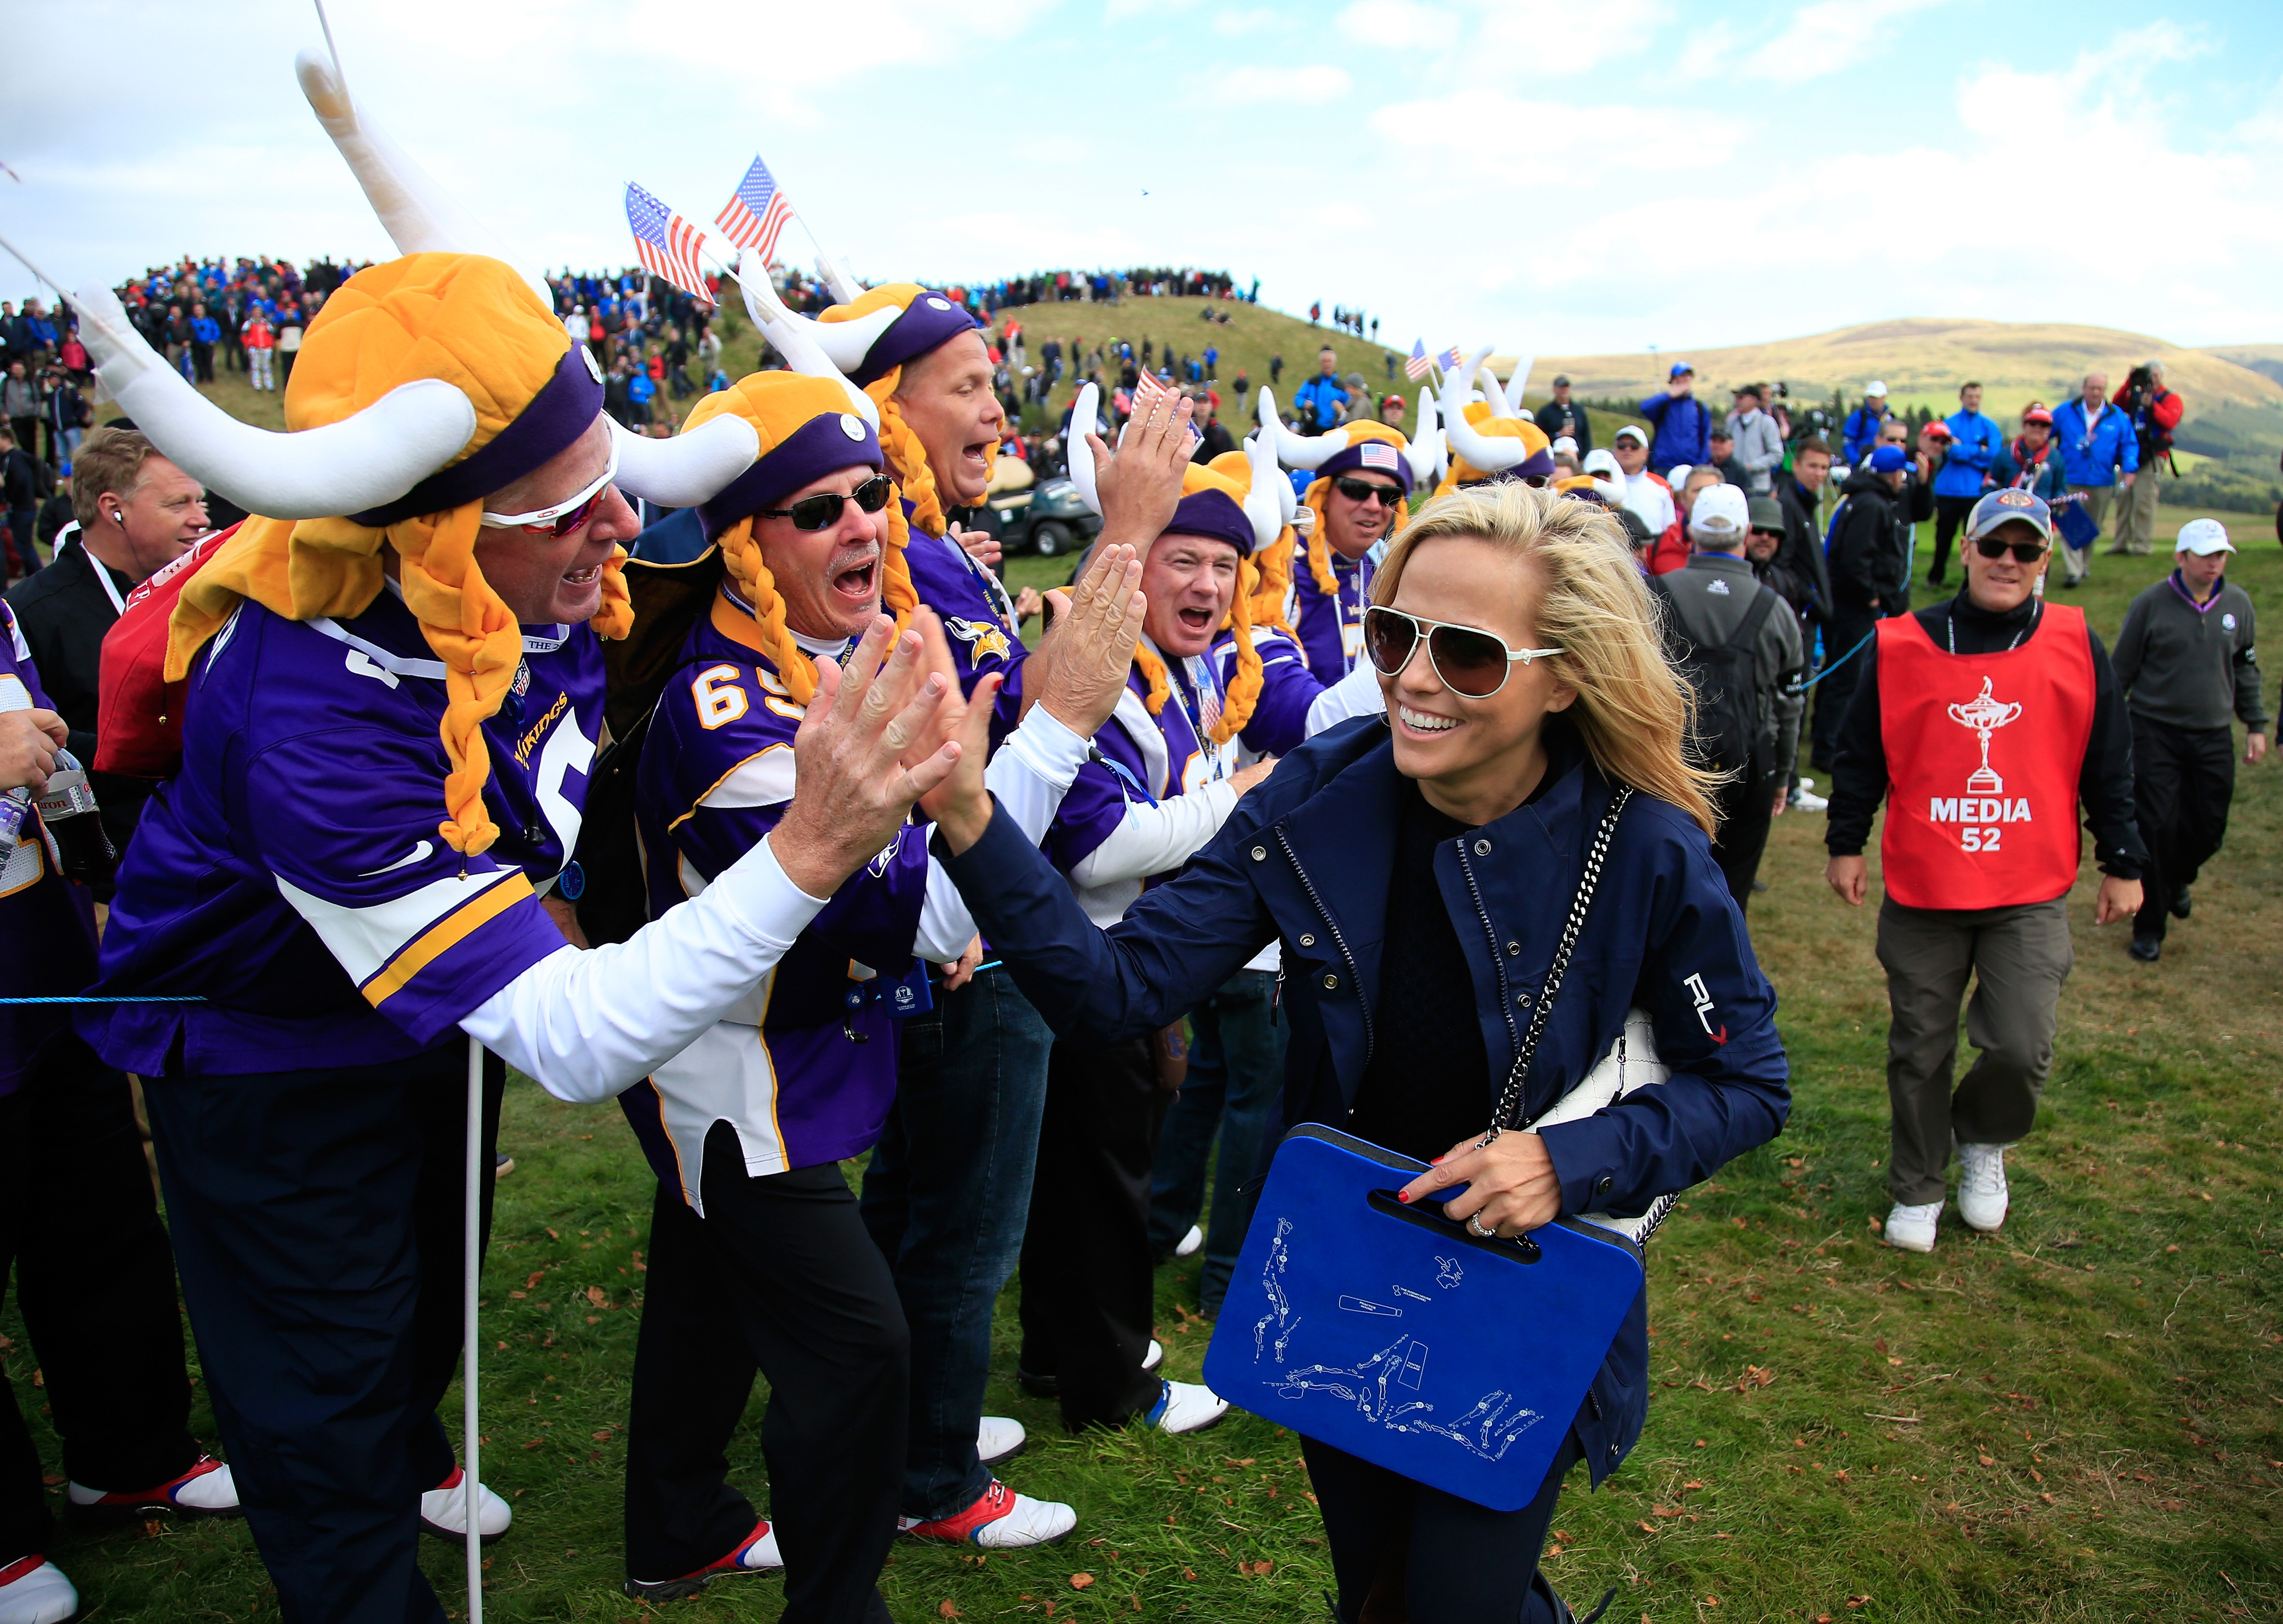 And seriously, when else am I going to use this picture of Phil Mickelson's wife high-fiving Vikings fans at the Ryder Cup?